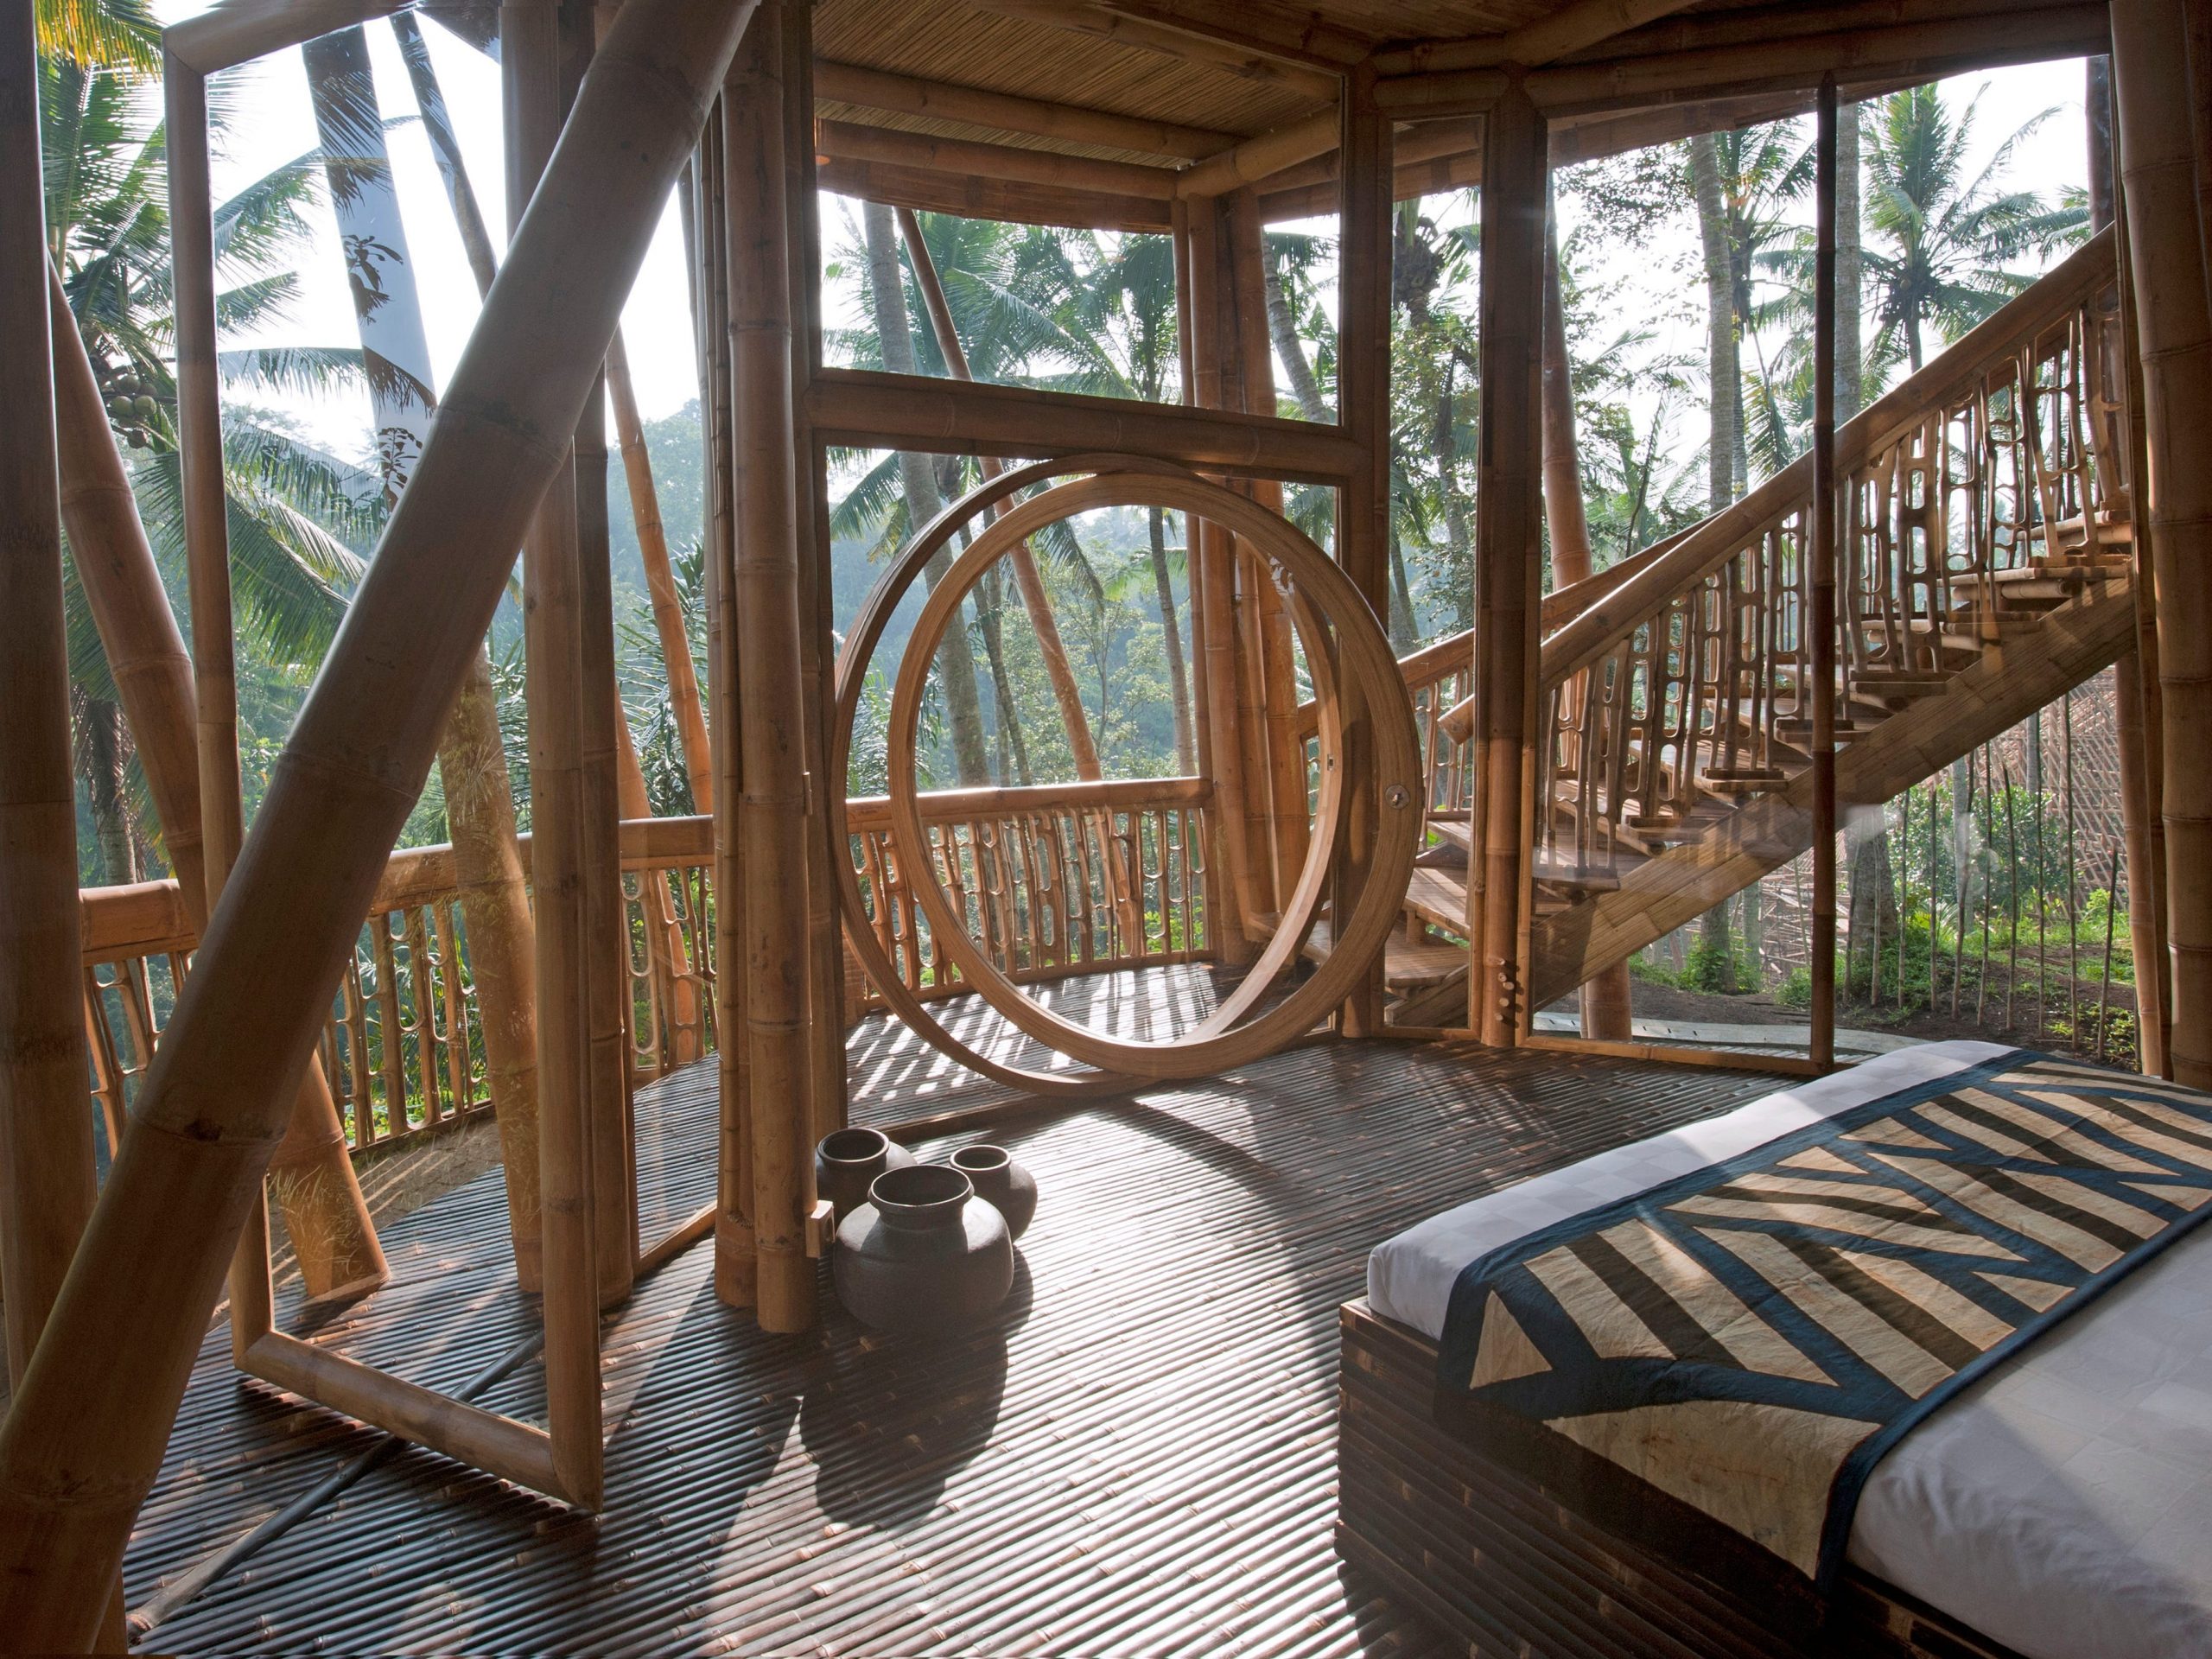 An Ibuku bedroom opens up to the natural air and has various intricate bamboo details